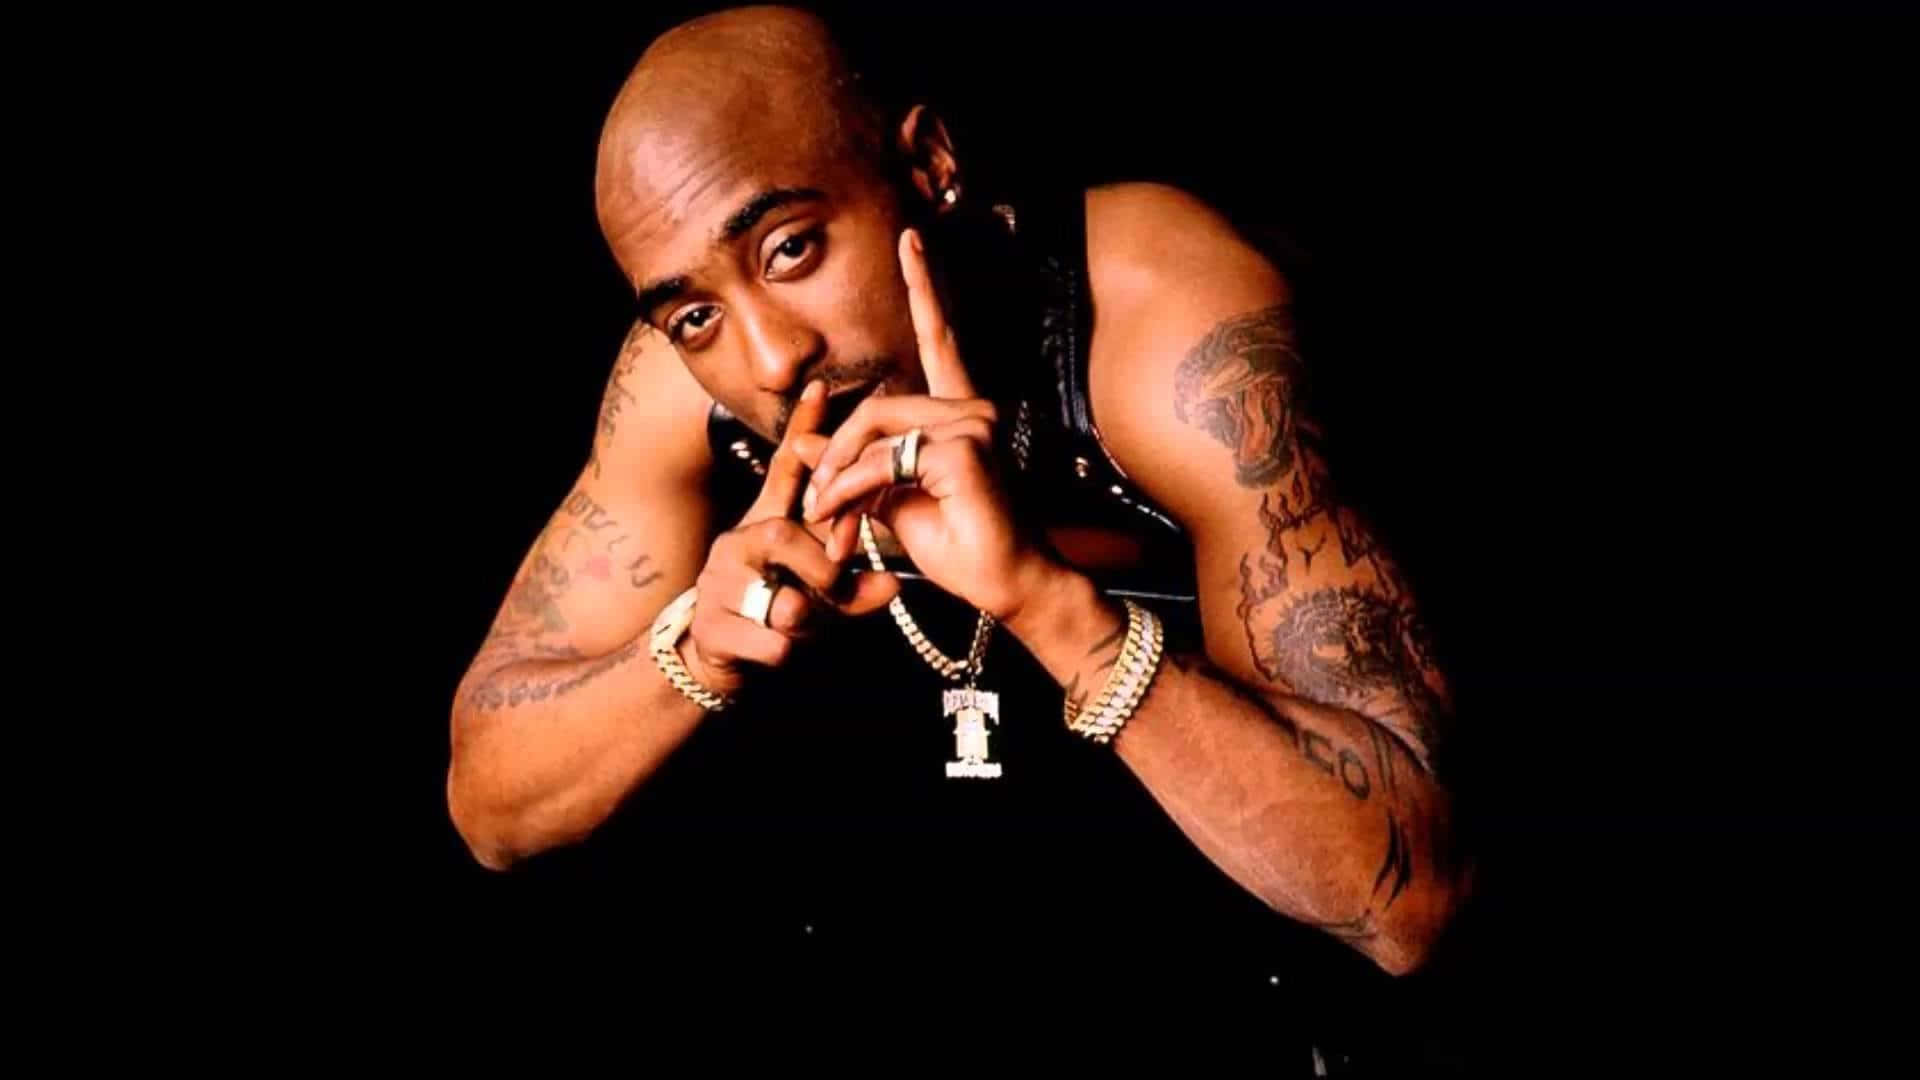 tupac wallpaper free hd widescreen - Coolwallpapers.me!